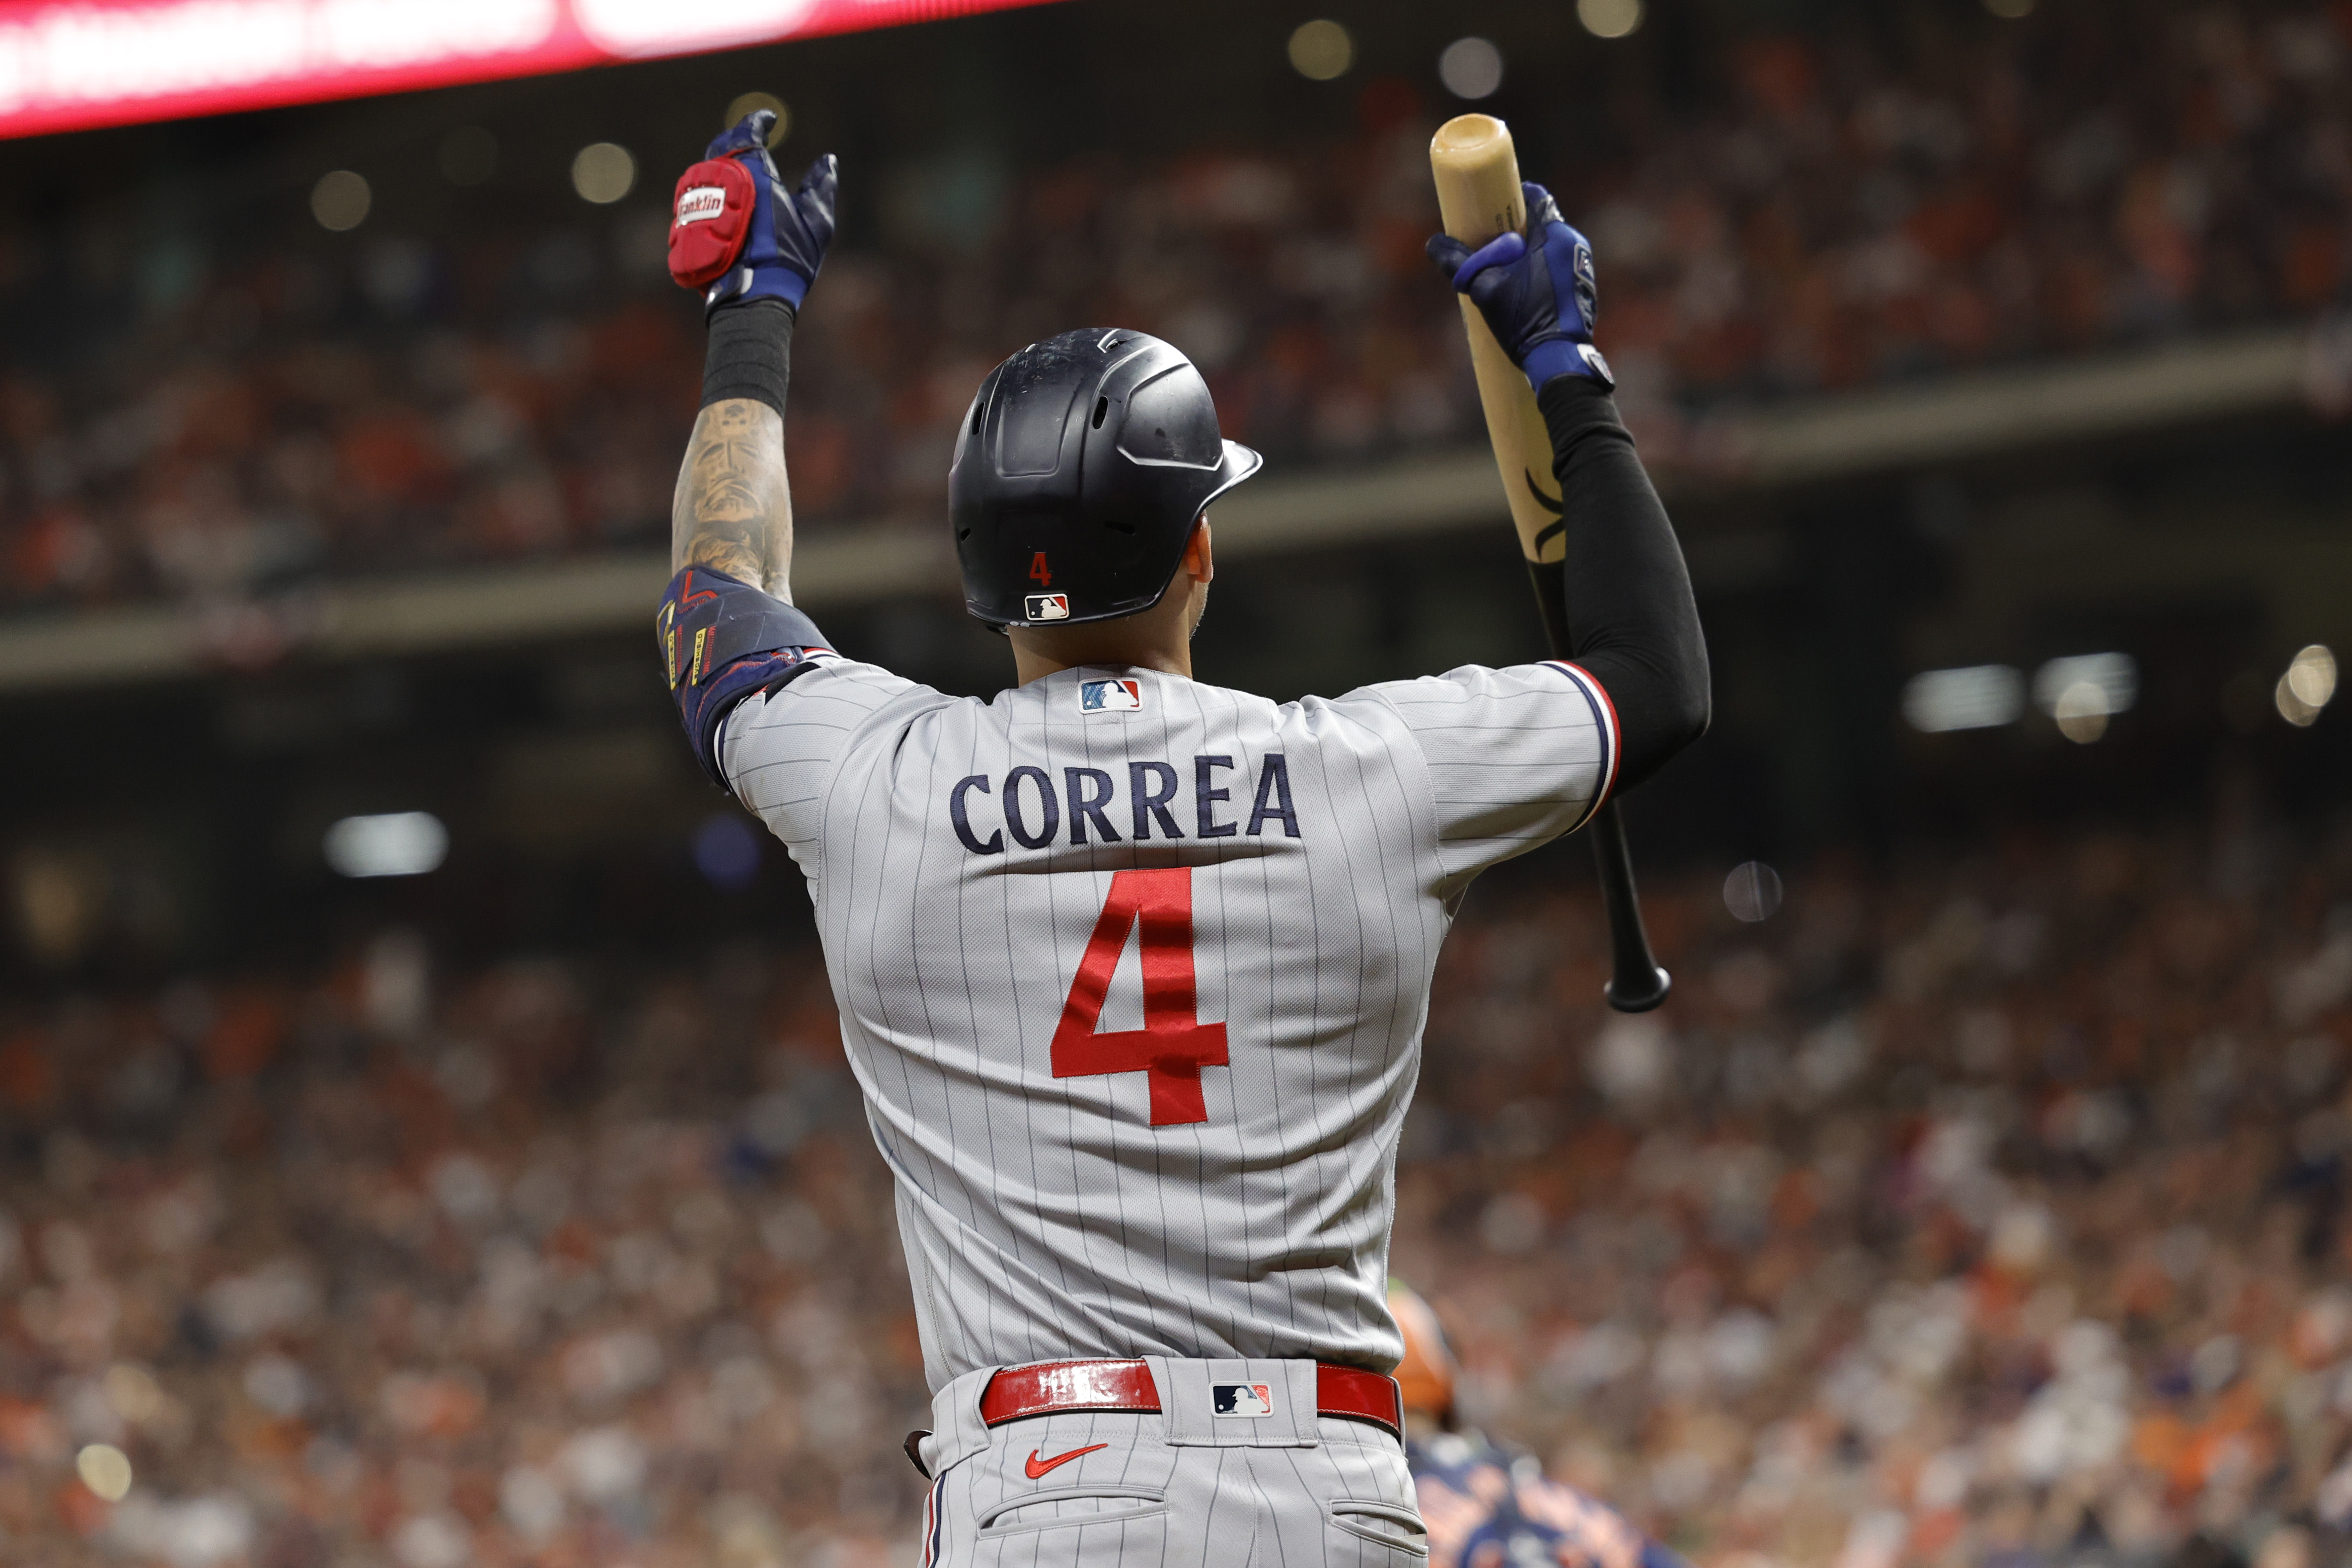 Report: Carlos Correa, Twins Agree to $200M Contract After Failed